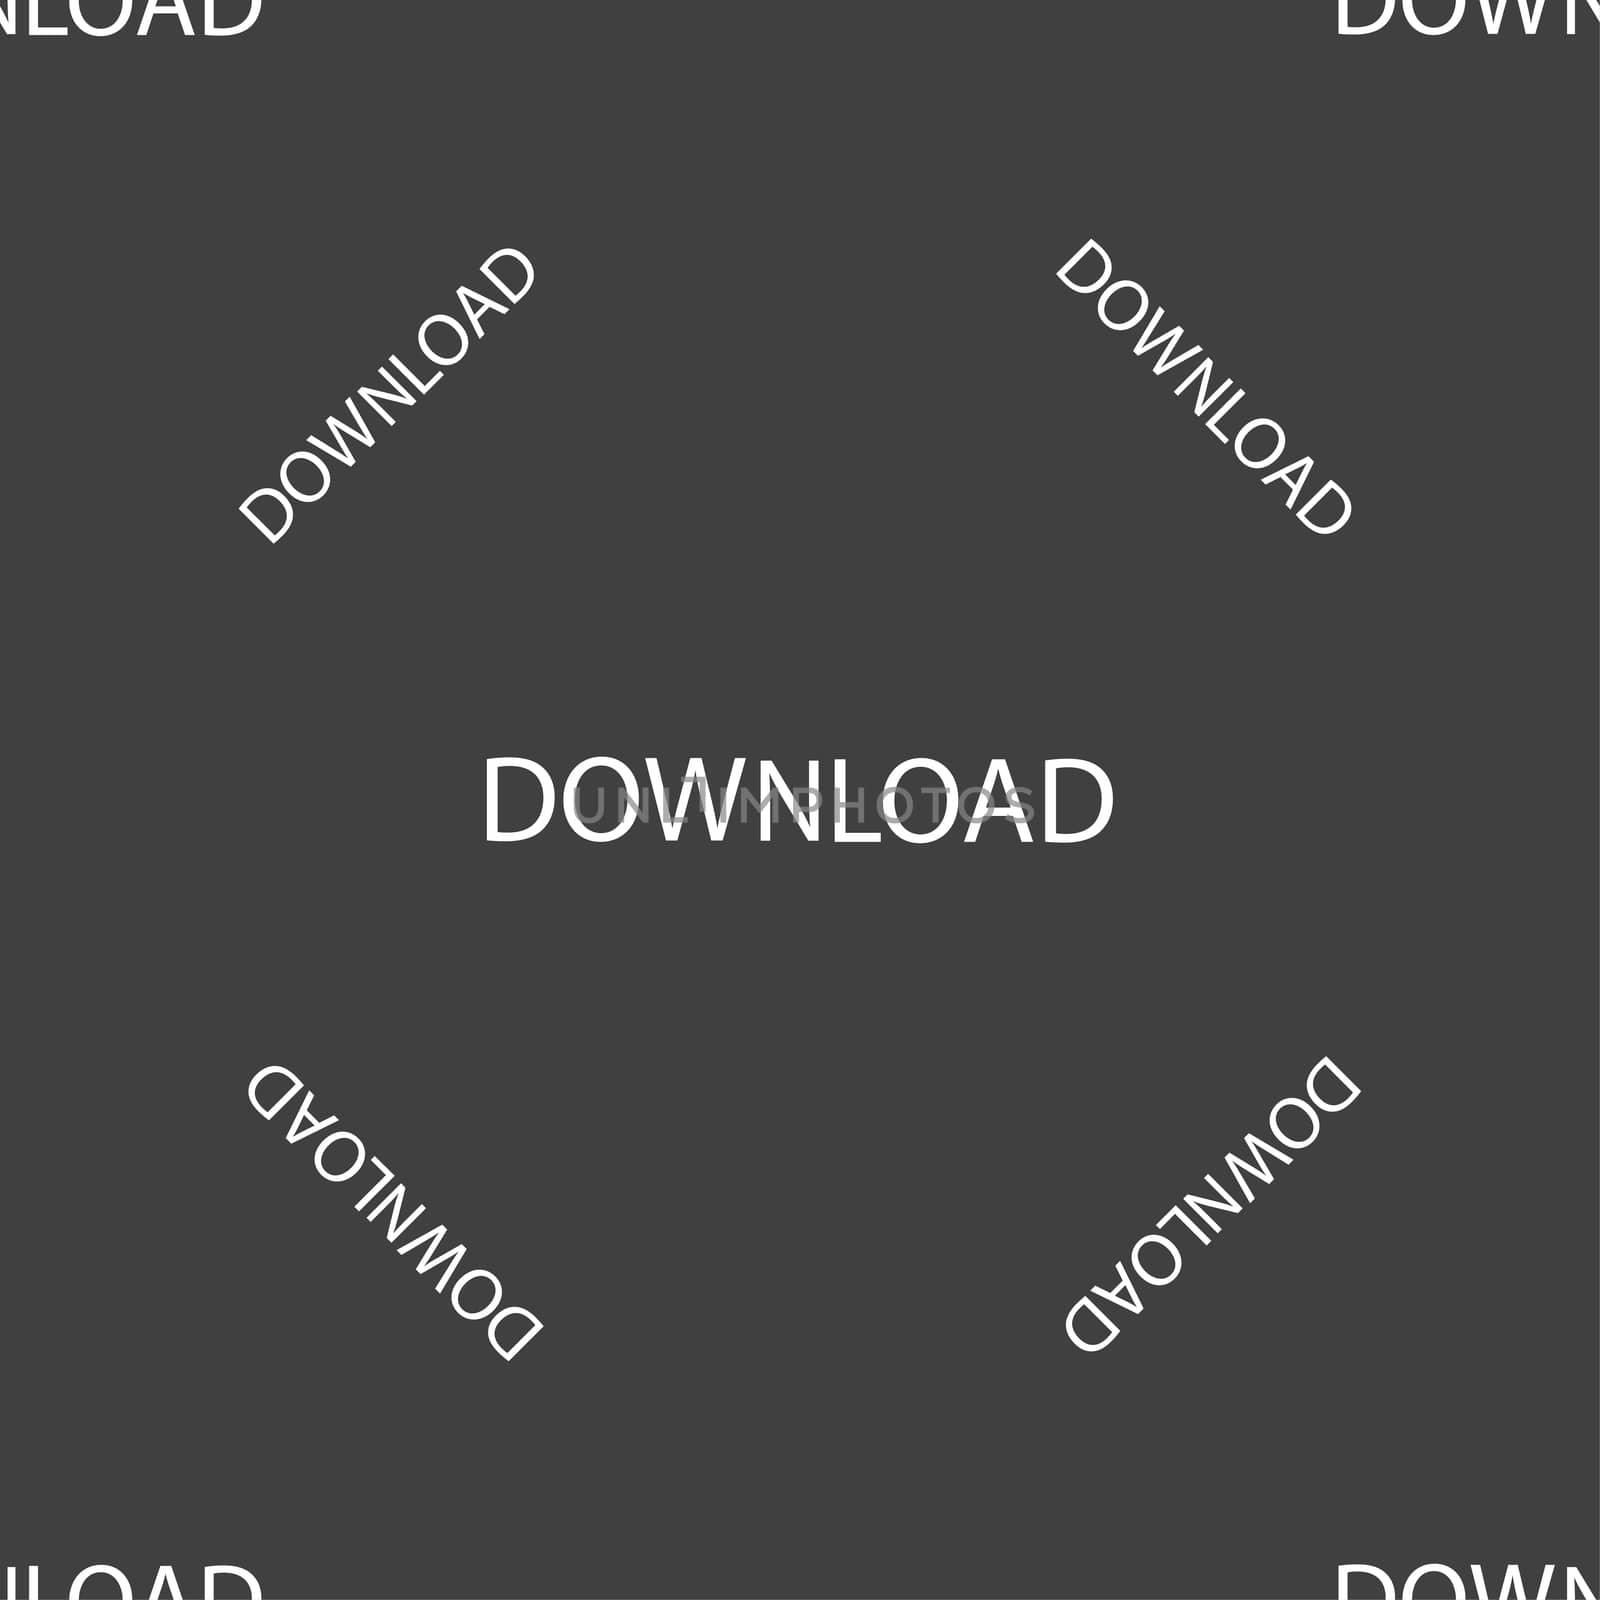 Download icon. Upload button. Load symbol. Seamless pattern on a gray background.  by serhii_lohvyniuk